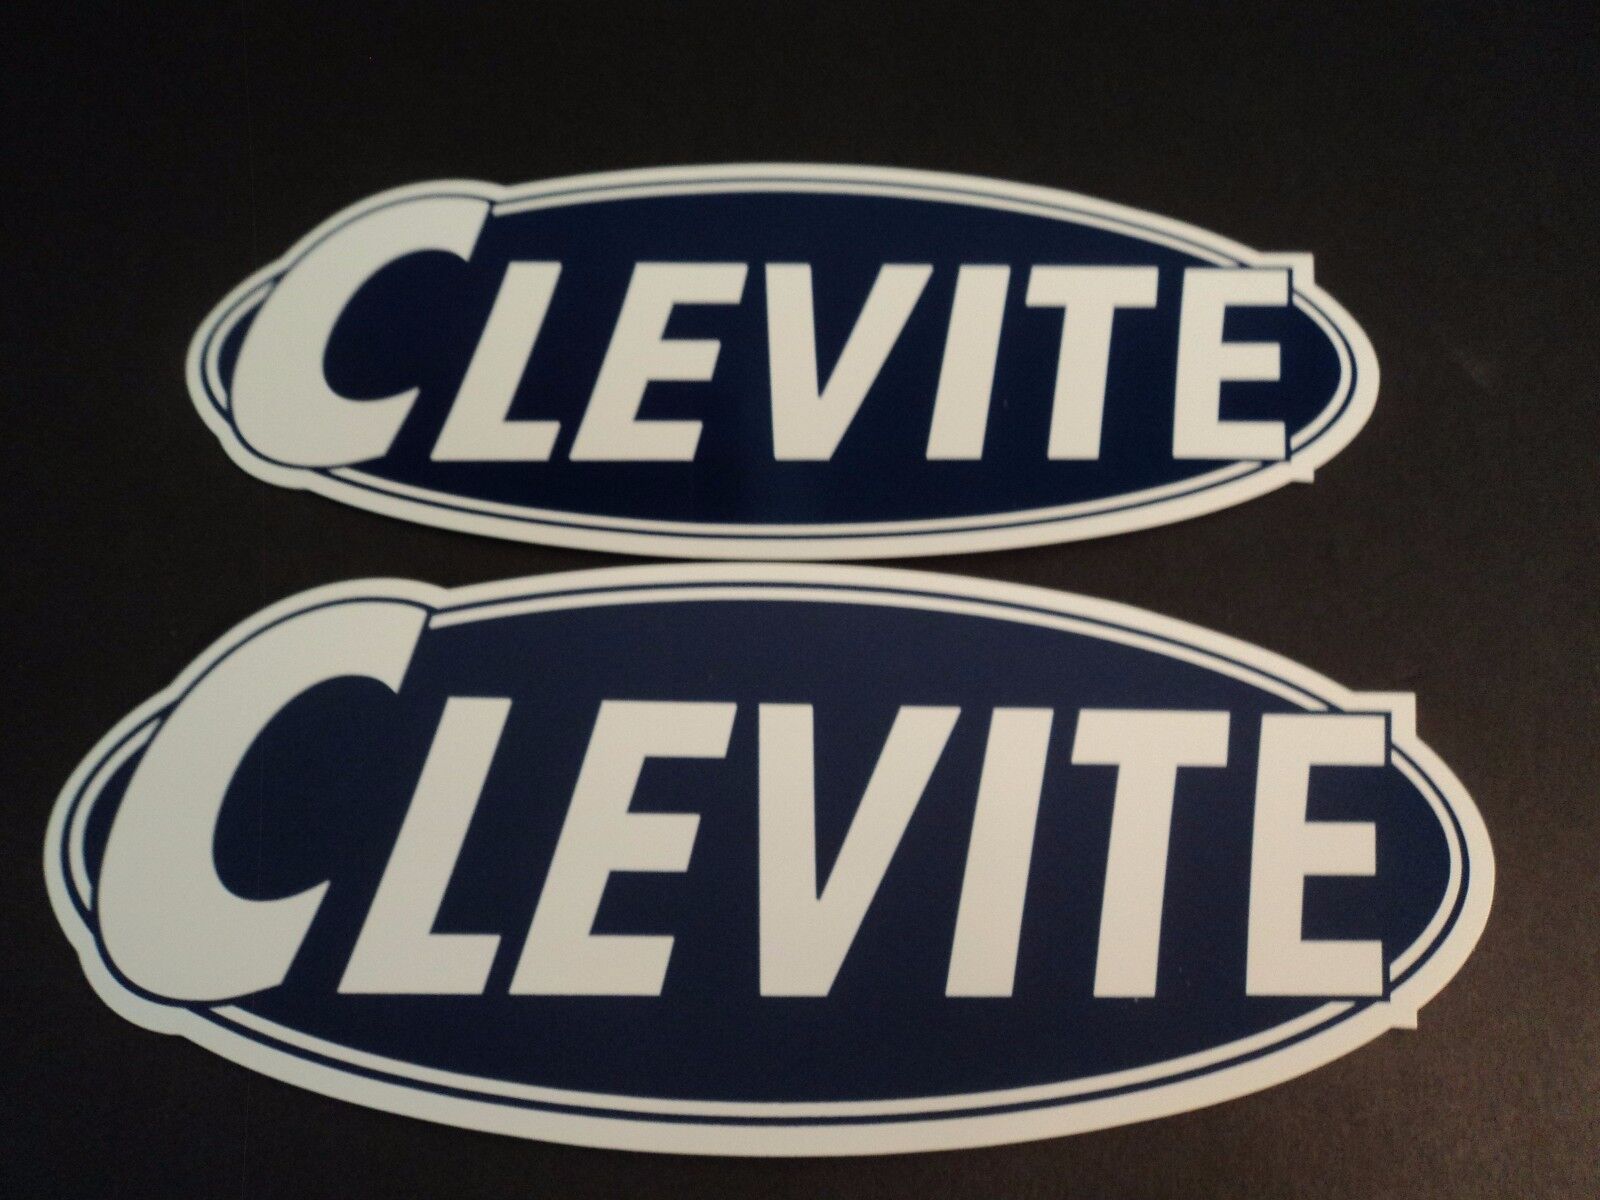 Lot of 2 CLEVITE NASCAR NHRA racing decals stickers large size